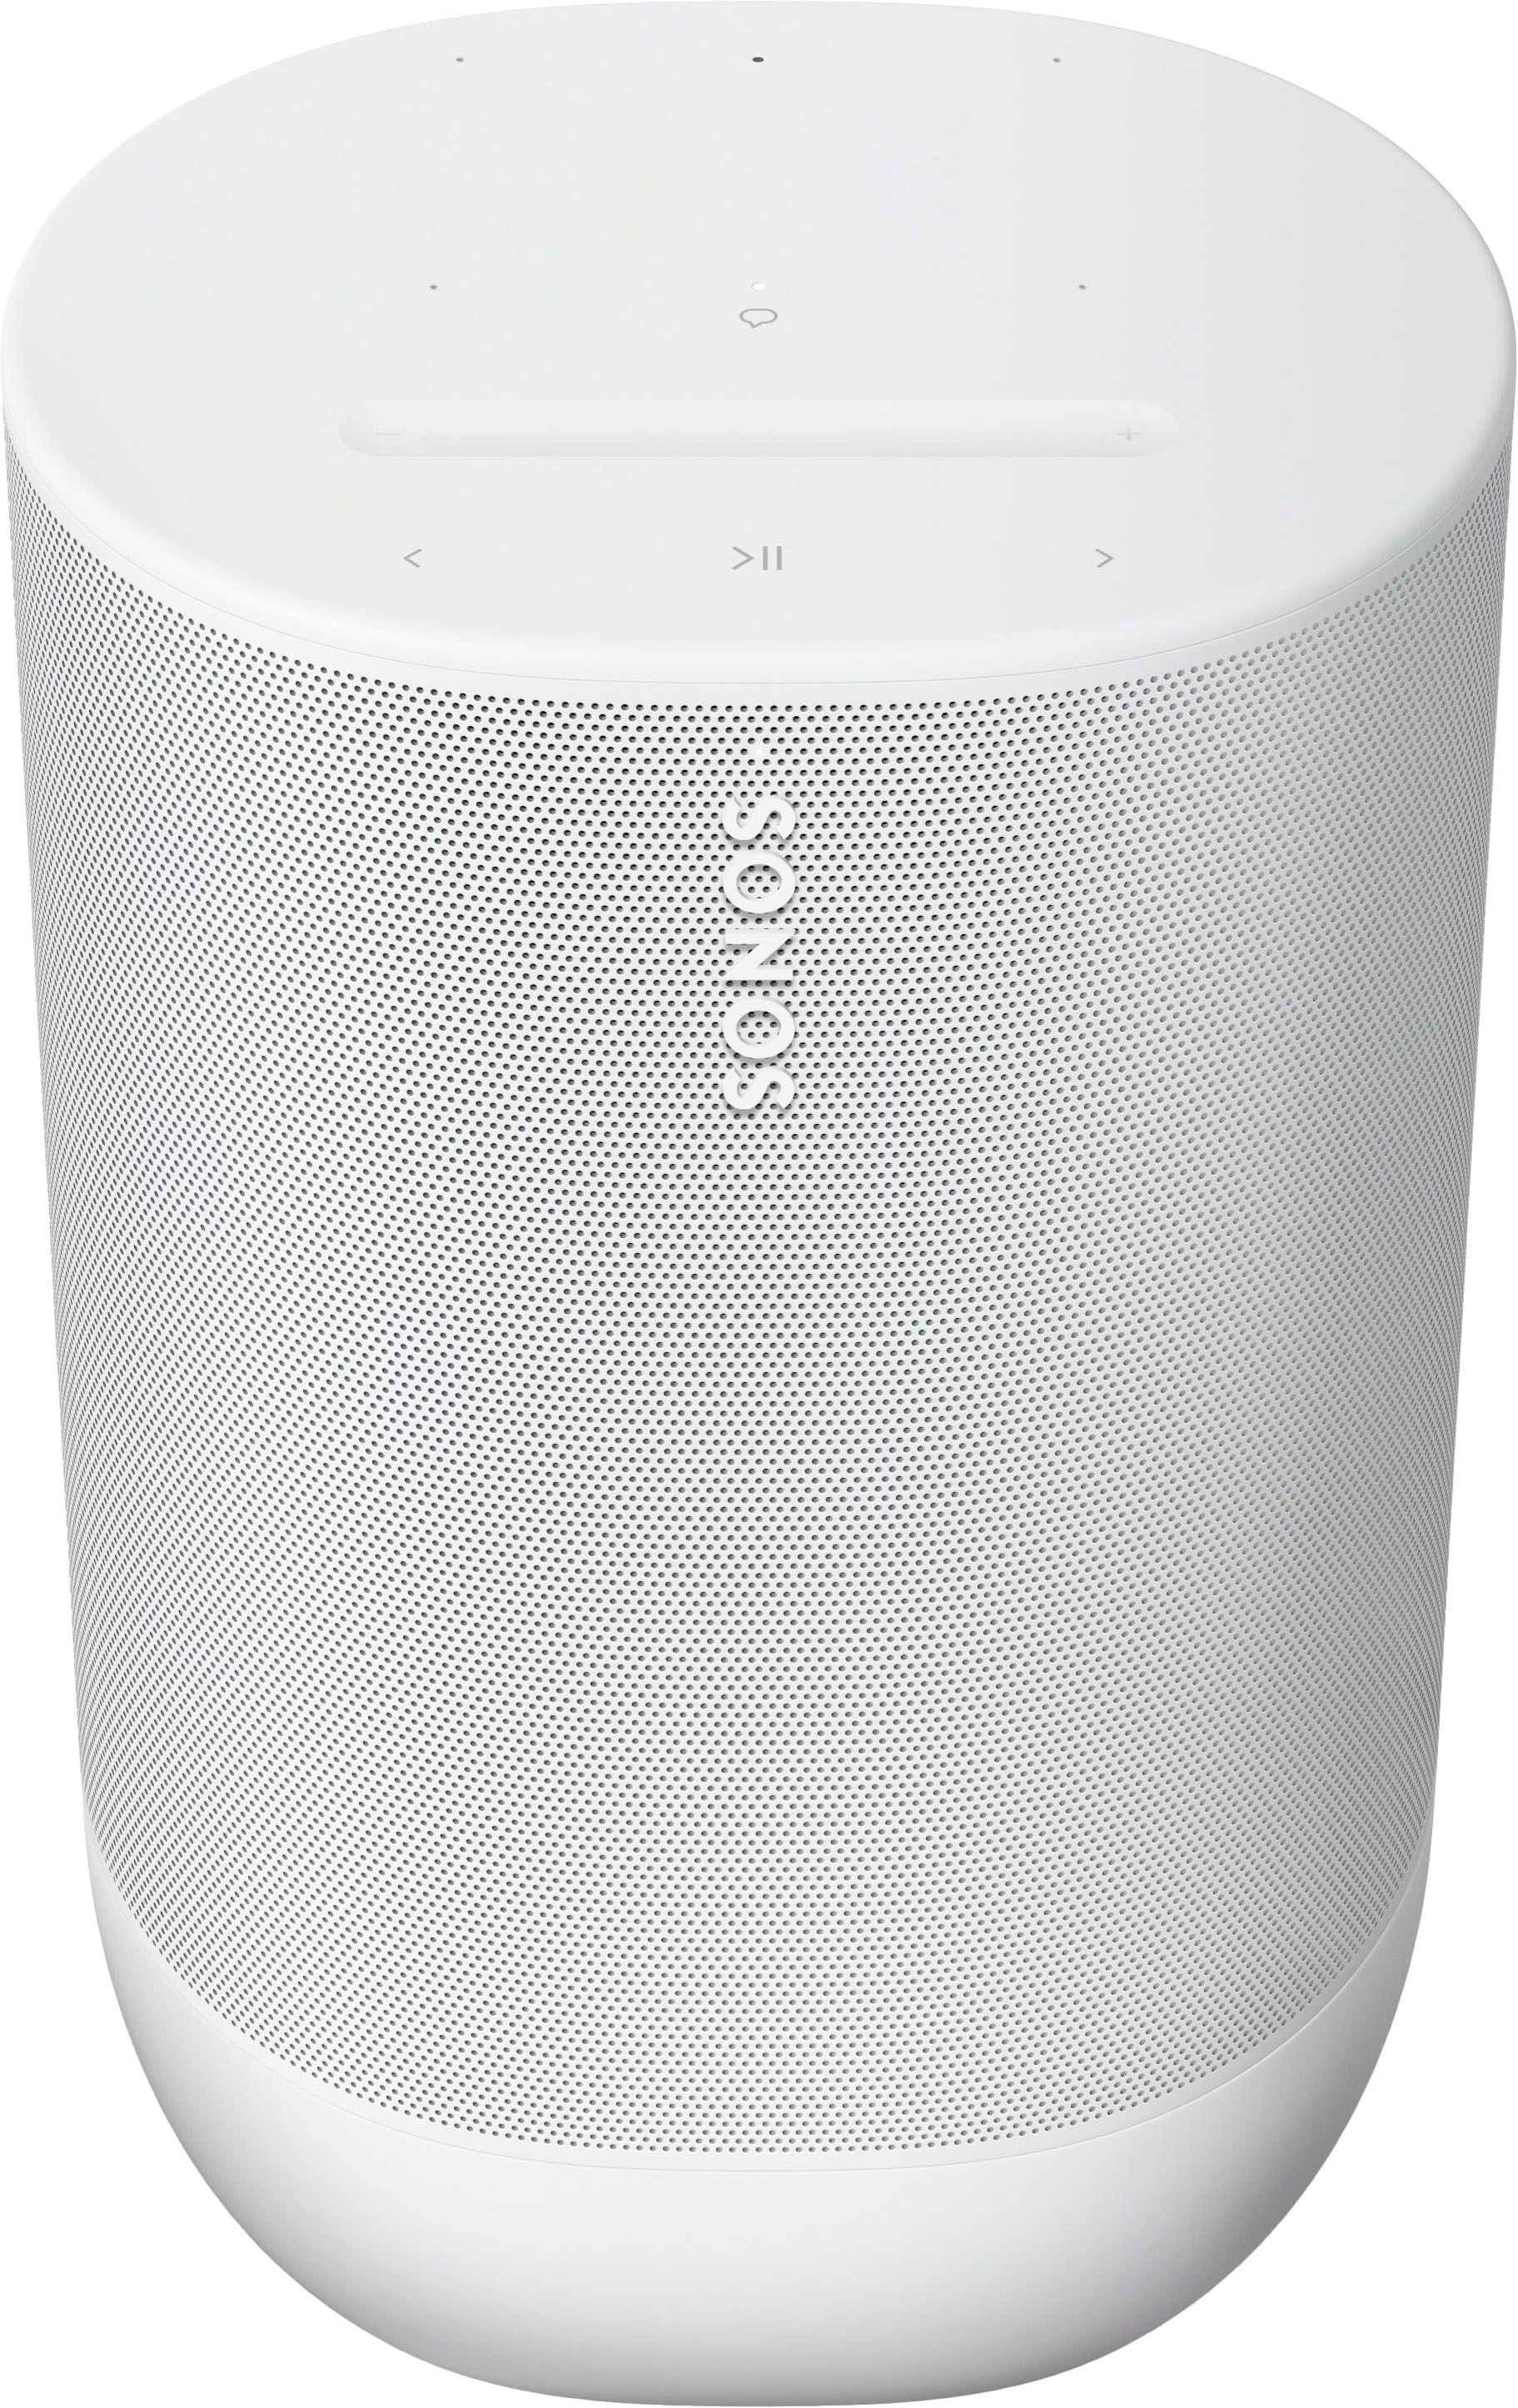 Sonos Move 2 (White) Wireless portable speaker with built-in  Alexa,  Apple AirPlay® 2, and Bluetooth® at Crutchfield